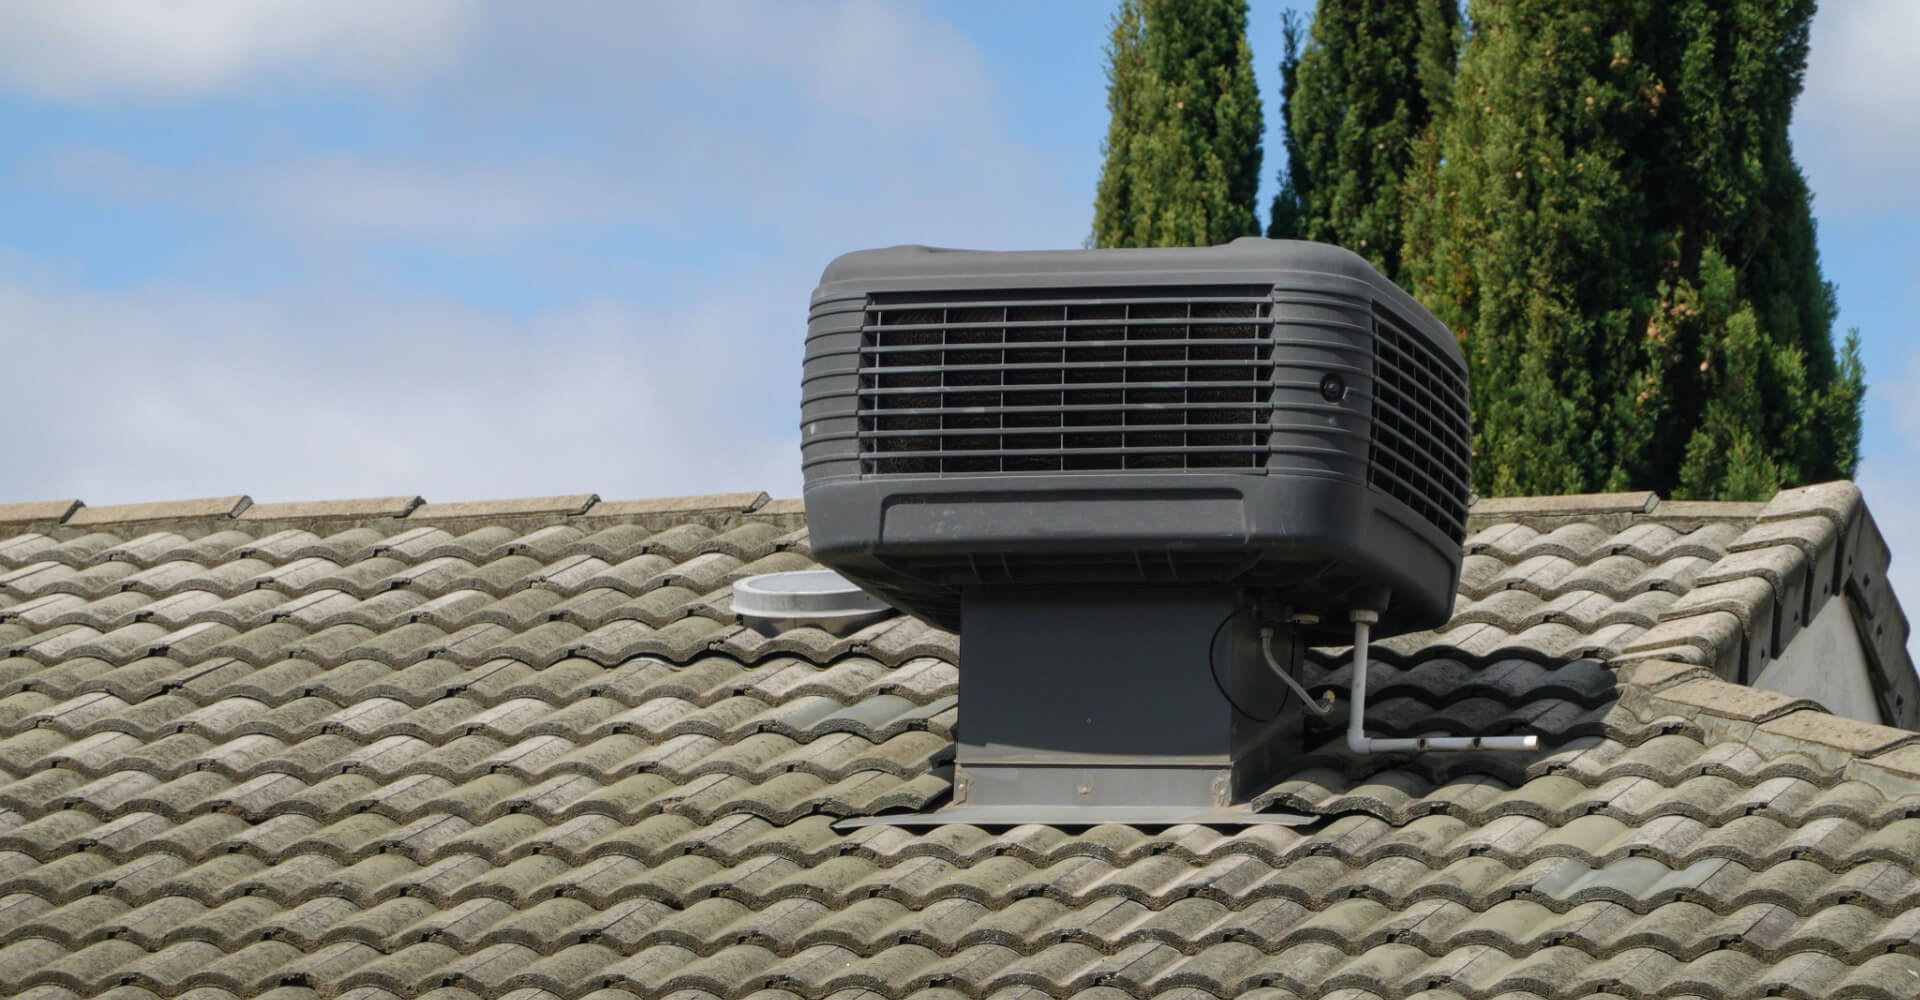 Evaporative Cooler on Roof of House